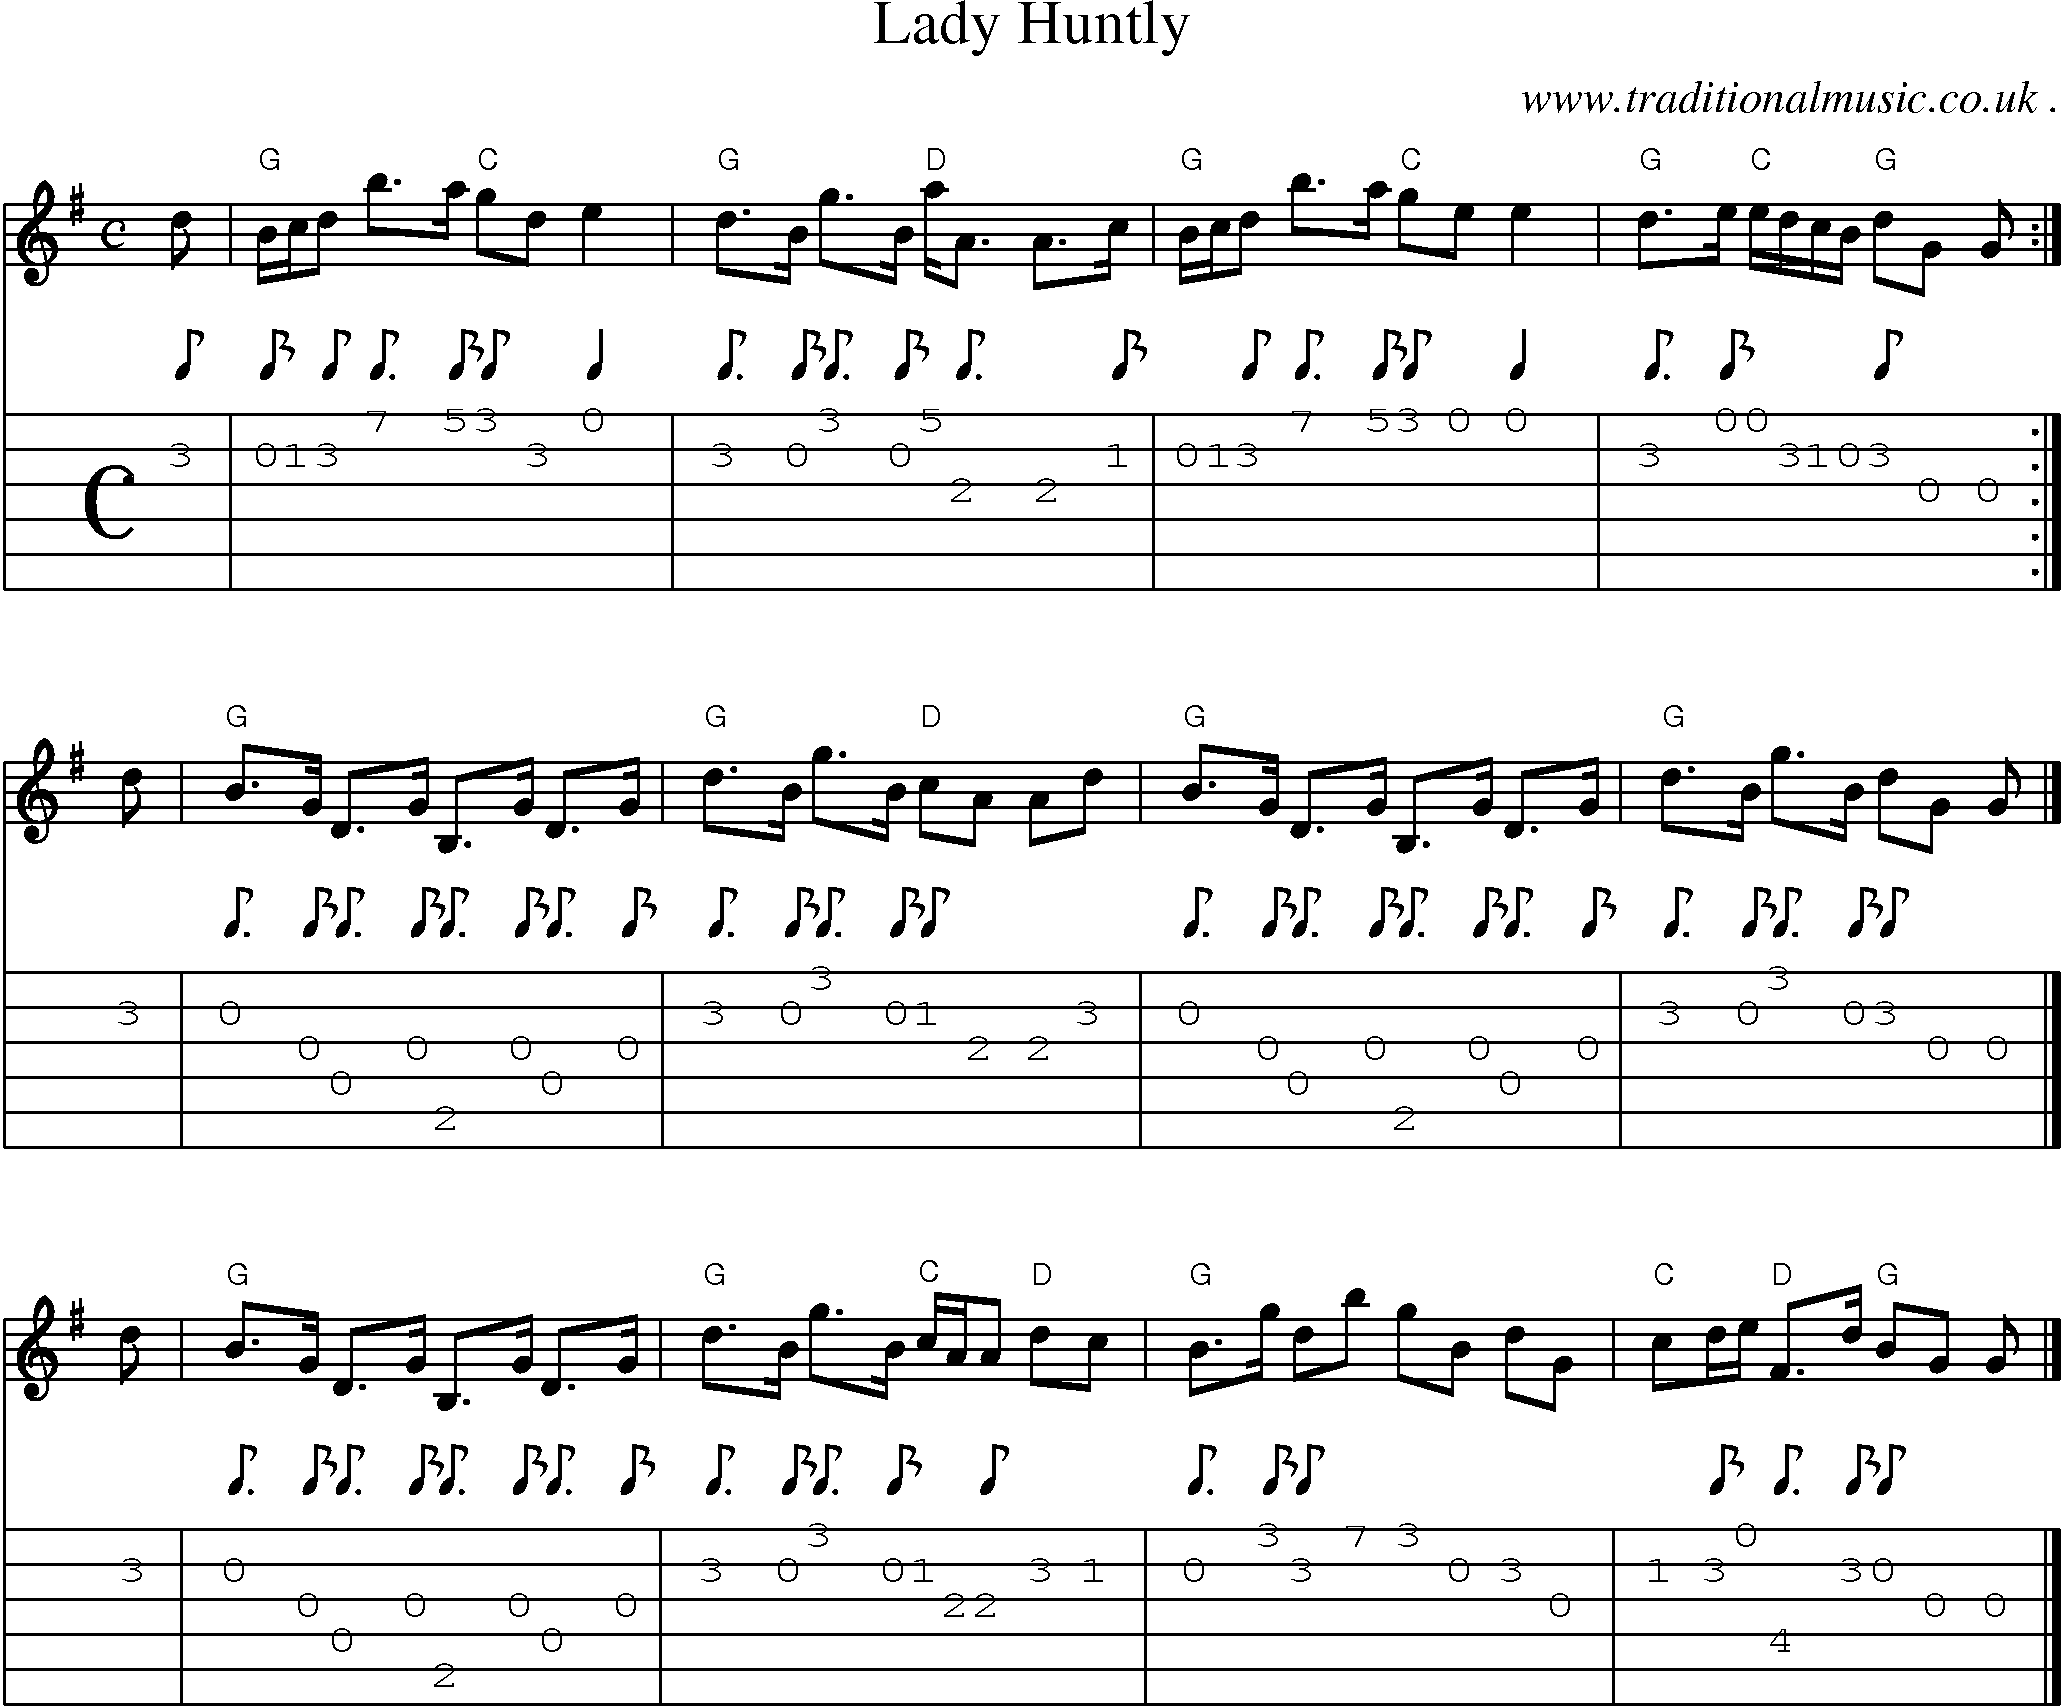 Sheet-music  score, Chords and Guitar Tabs for Lady Huntly